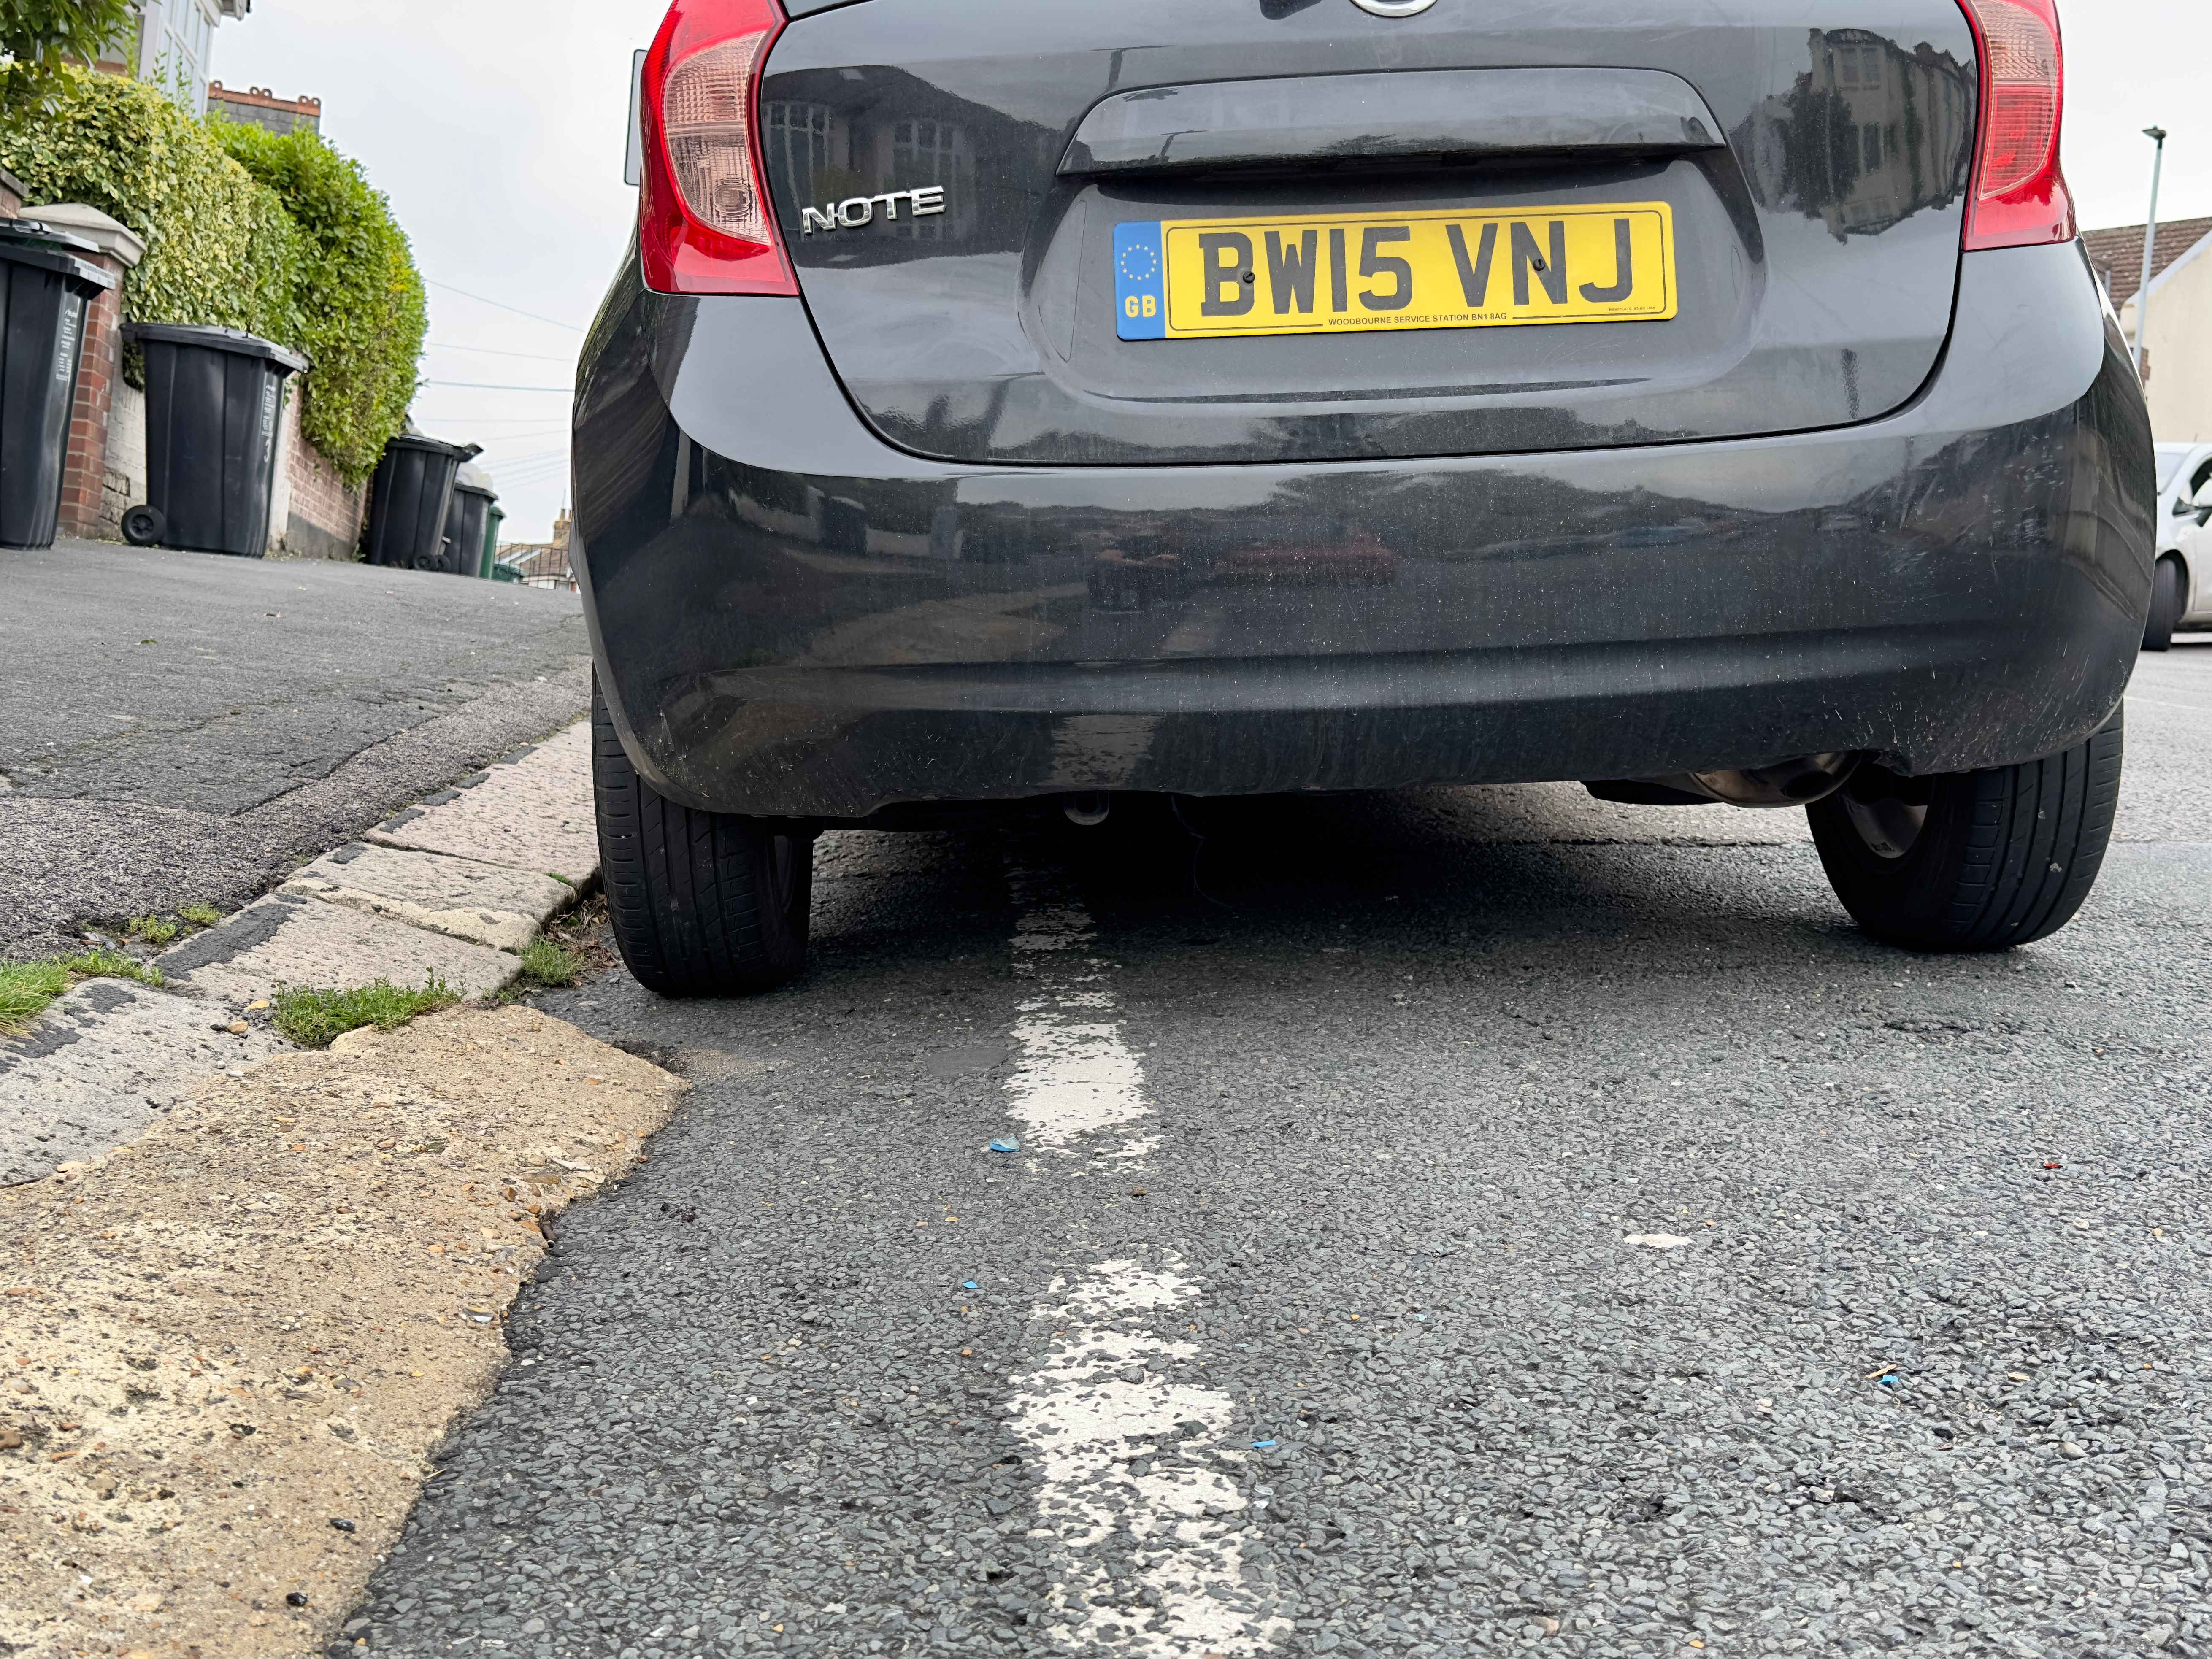 Photograph of BW15 VNJ - a Black Nissan Note parked in Hollingdean by a non-resident who uses the local area as part of their Brighton commute. The fifth of fifteen photographs supplied by the residents of Hollingdean.